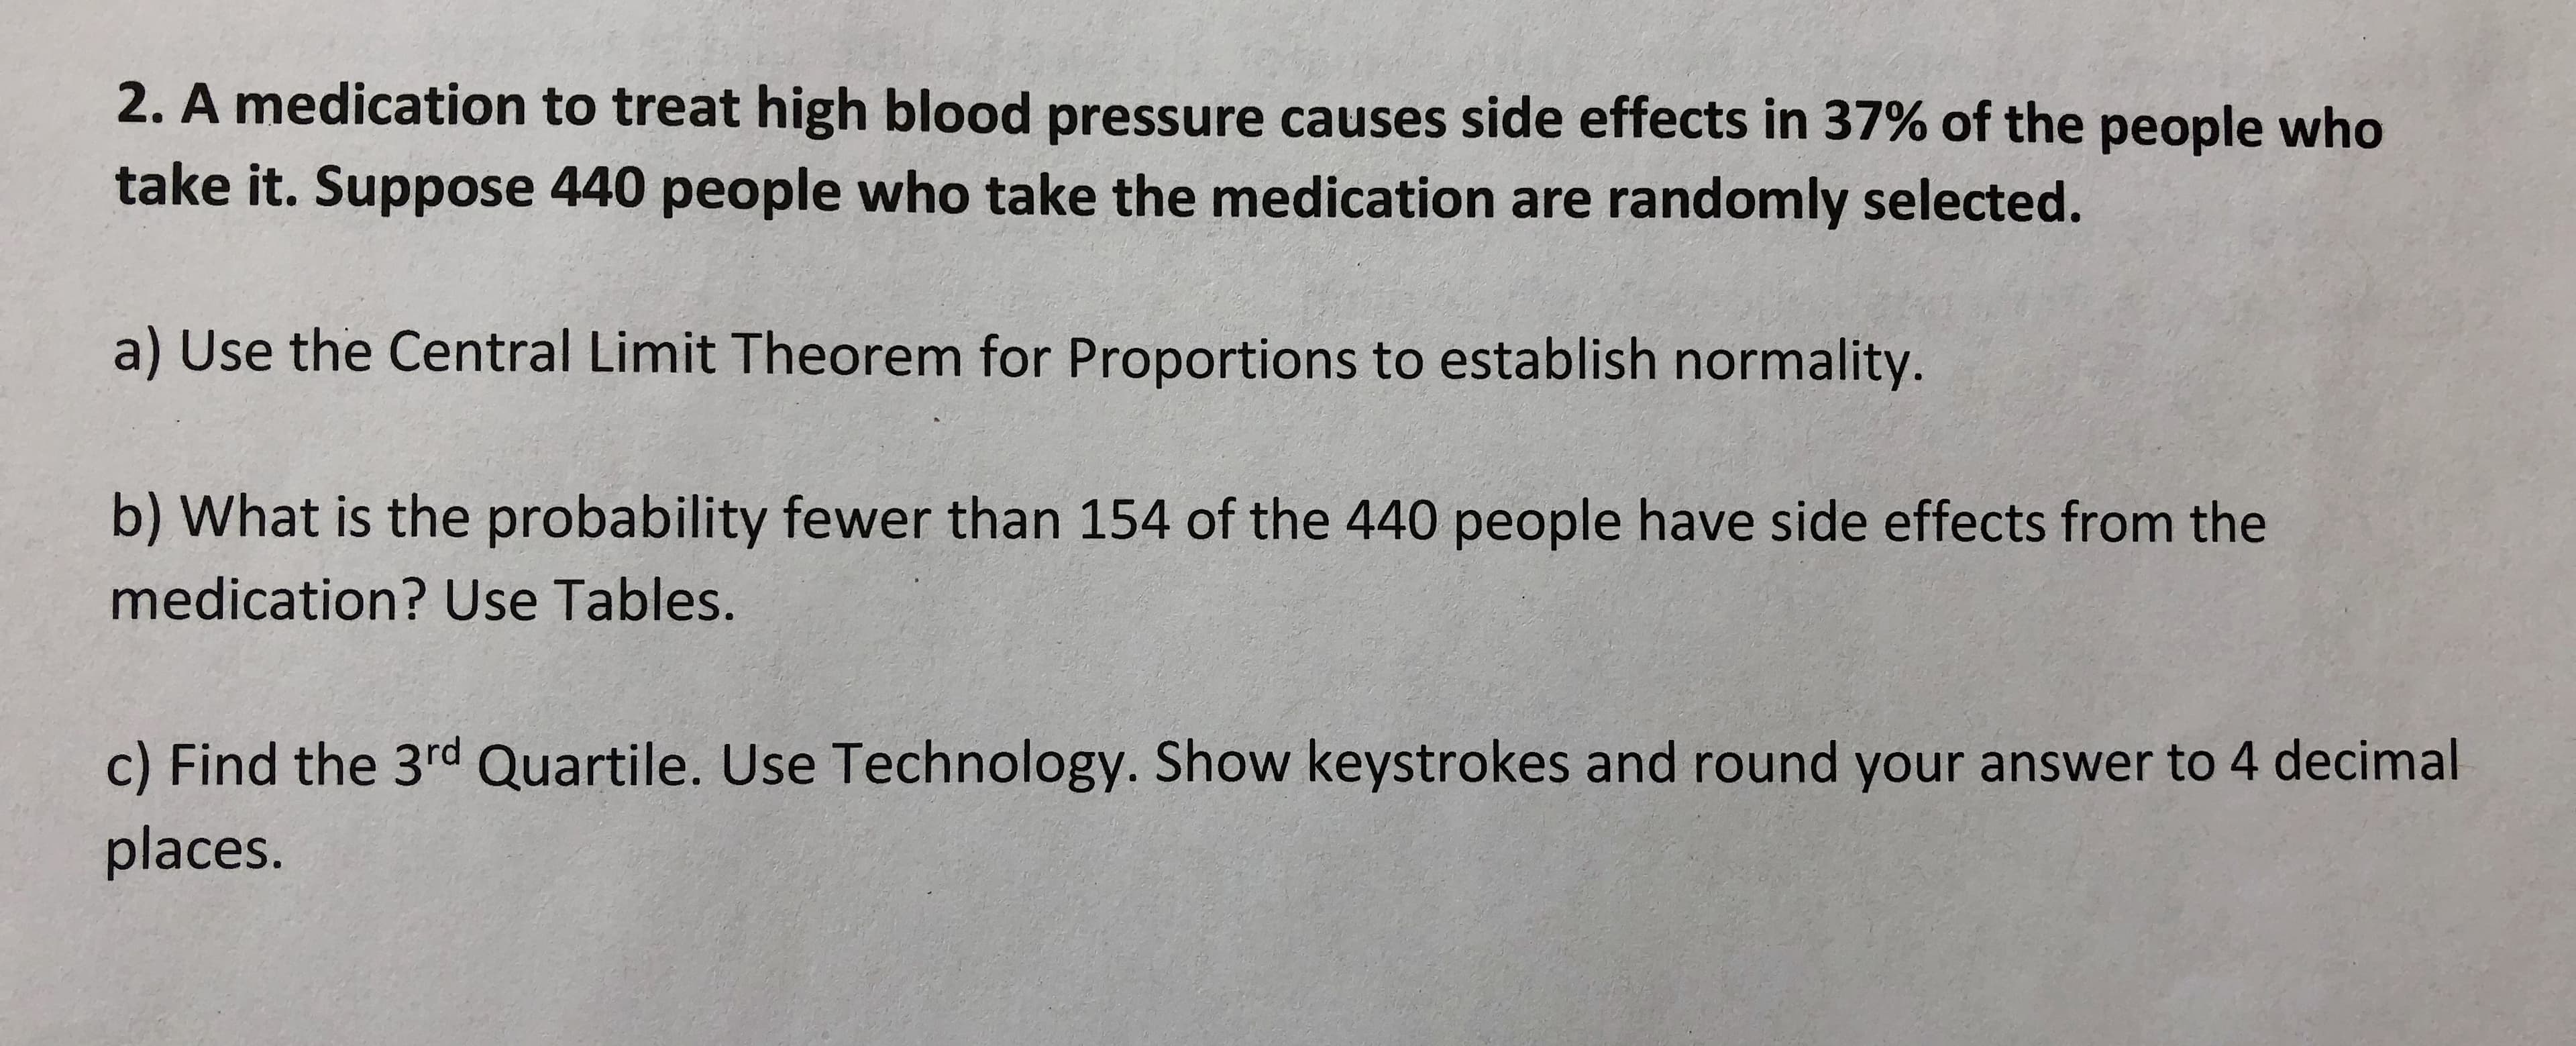 2. A medication to treat high blood pressure causes side effects in 37% of the people who
take it. Suppose 440 people who take the medication are randomly selected.
a) Use the Central Limit Theorem for Proportions to establish normality.
b) What is the probability fewer than 154 of the 440 people have side effects from the
medication? Use Tables.
c) Find the 3rd Quartile. Use Technology. Show keystrokes and round your answer to 4 decimal
places.
